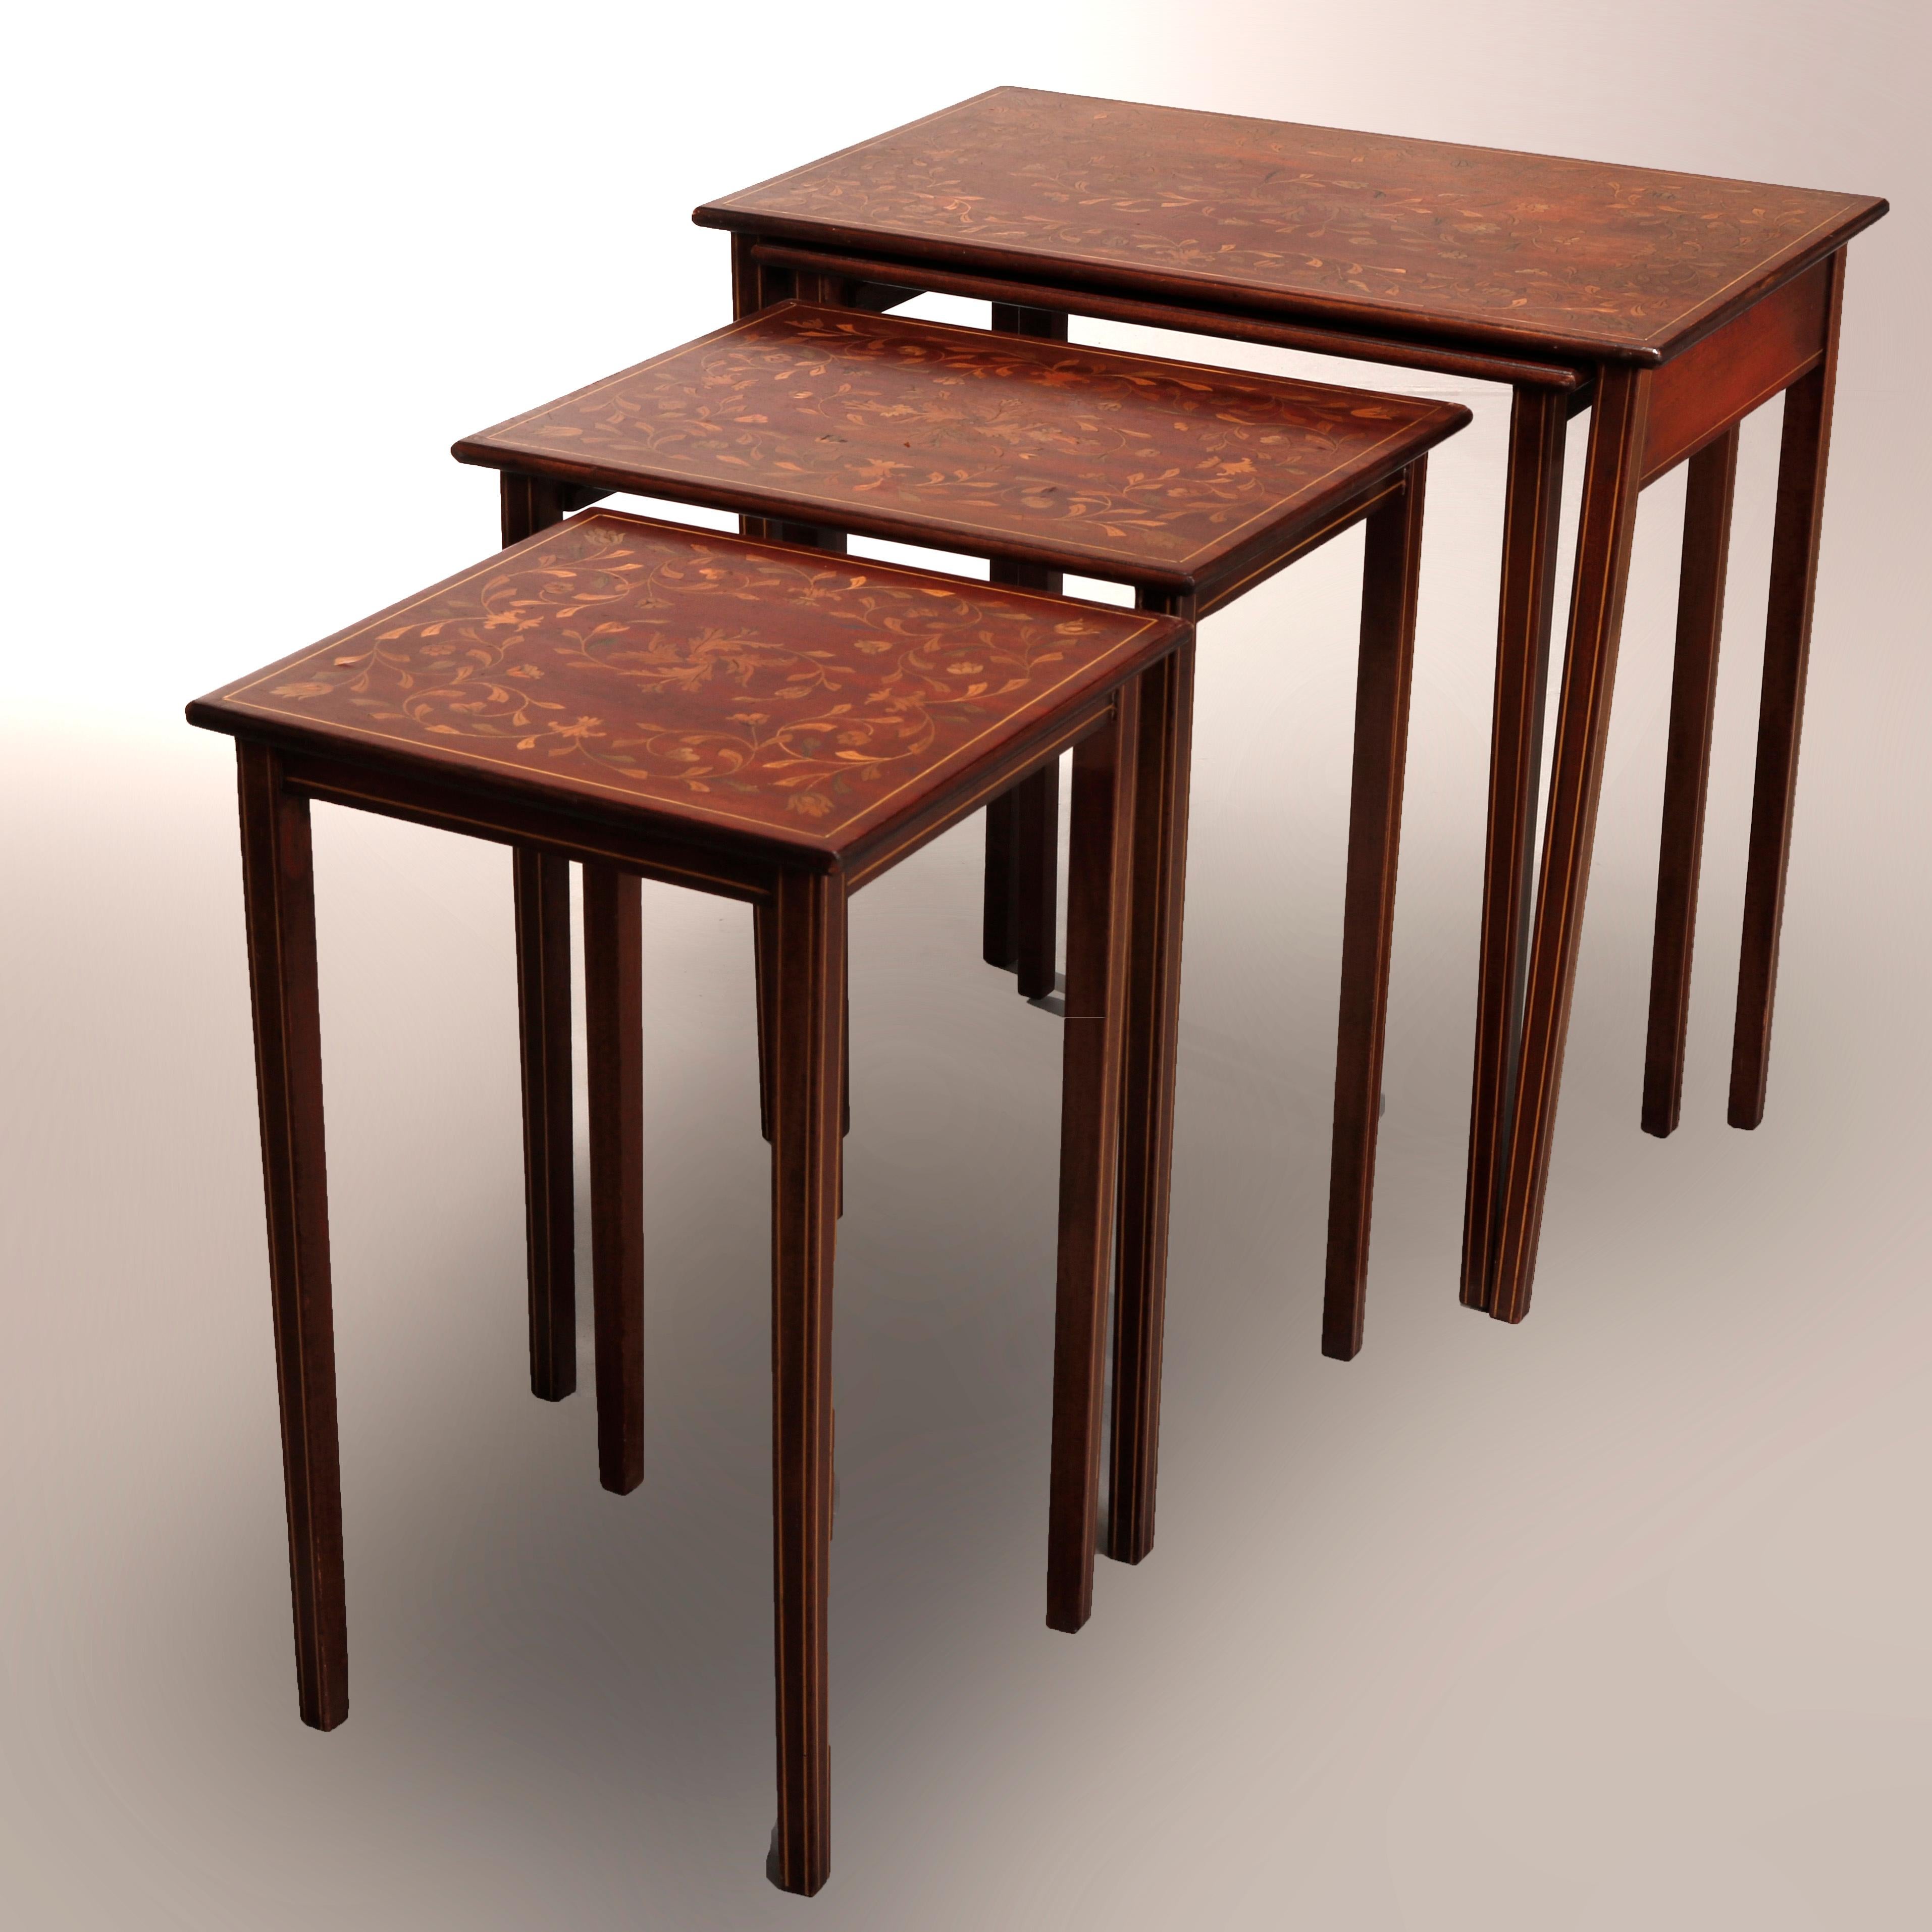 American Antique R.J. Horner Mahogany Marquetry Satinwood Inlay Nesting Tables circa 1910